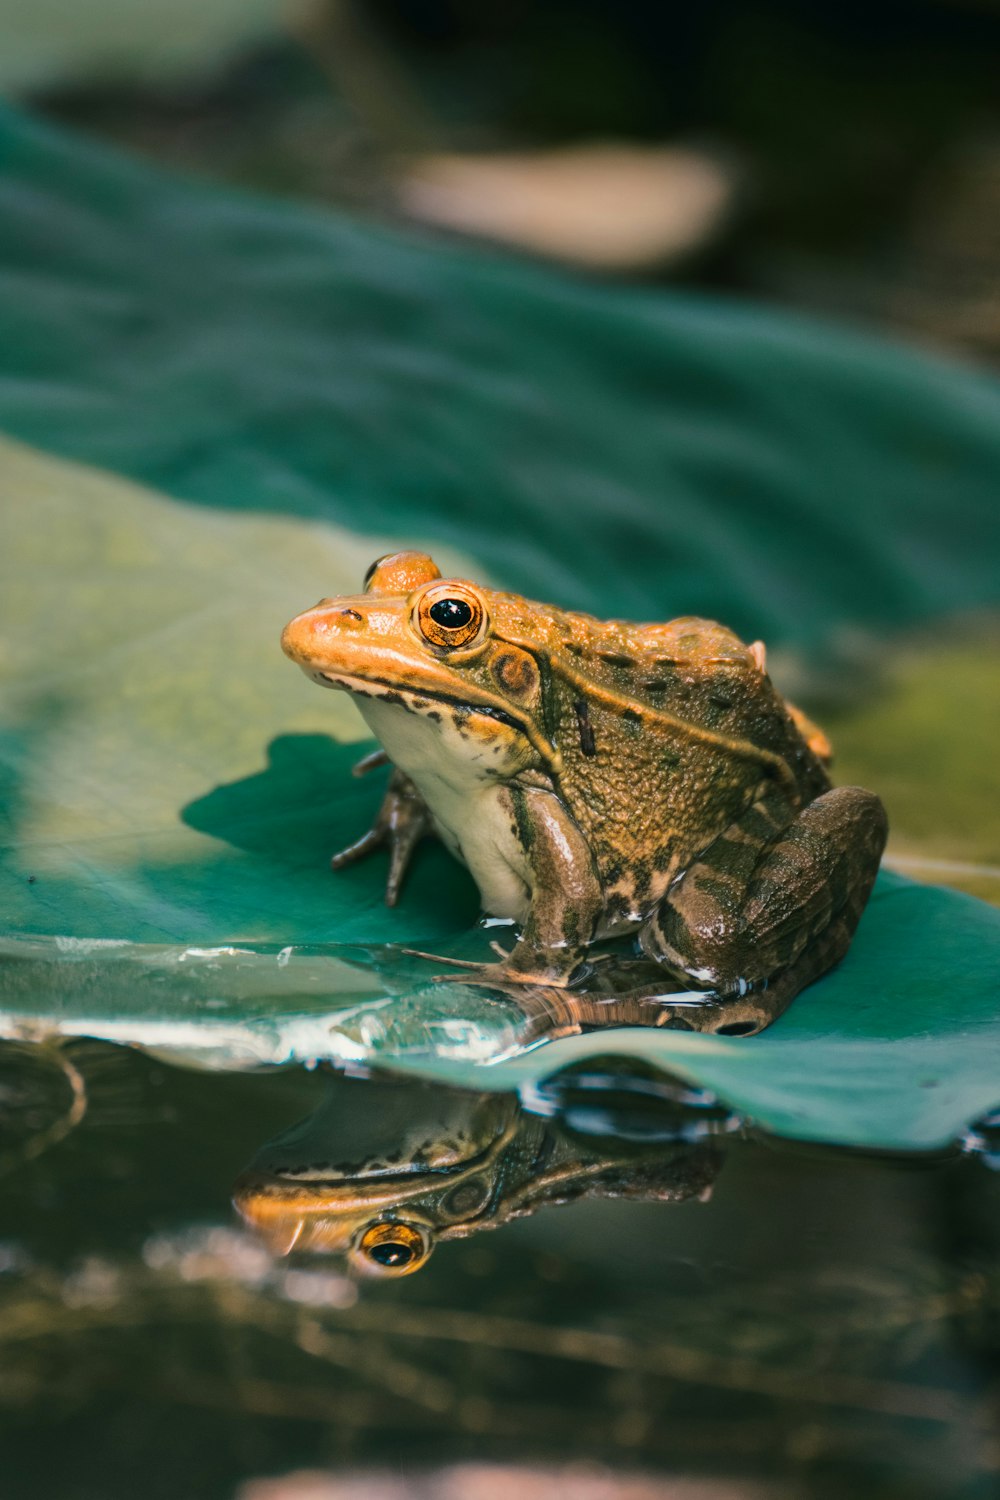 green frog on water during daytime